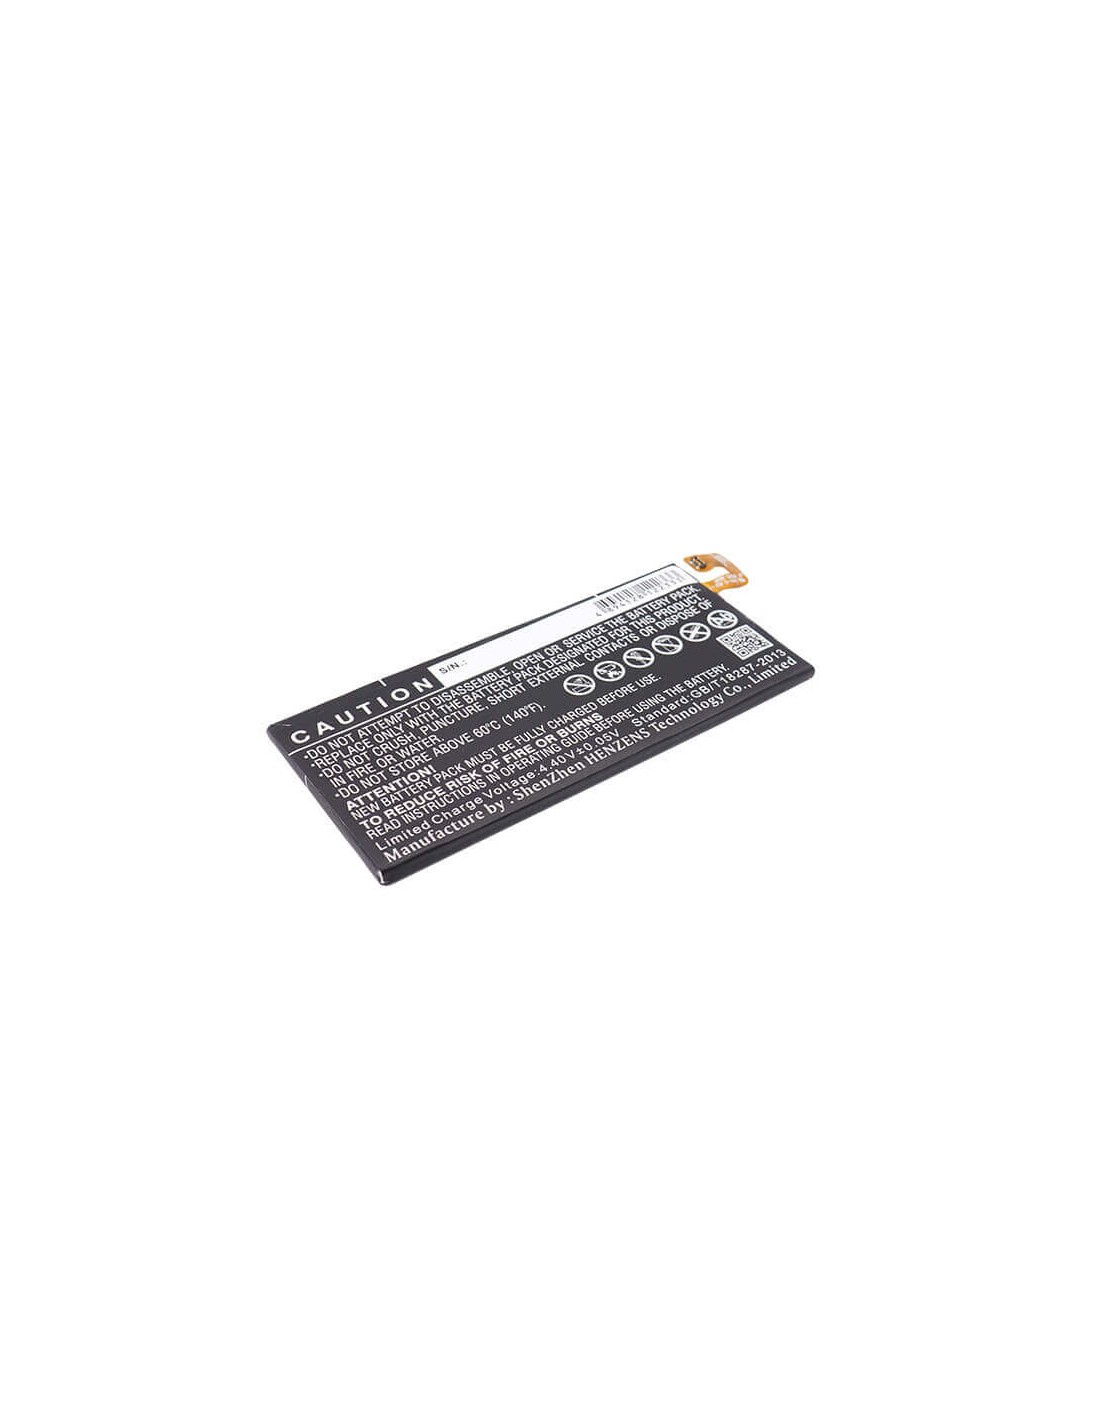 Battery for Samsung, Galaxy On5 2016 Duos 3.85V, 2600mAh - 10.01Wh